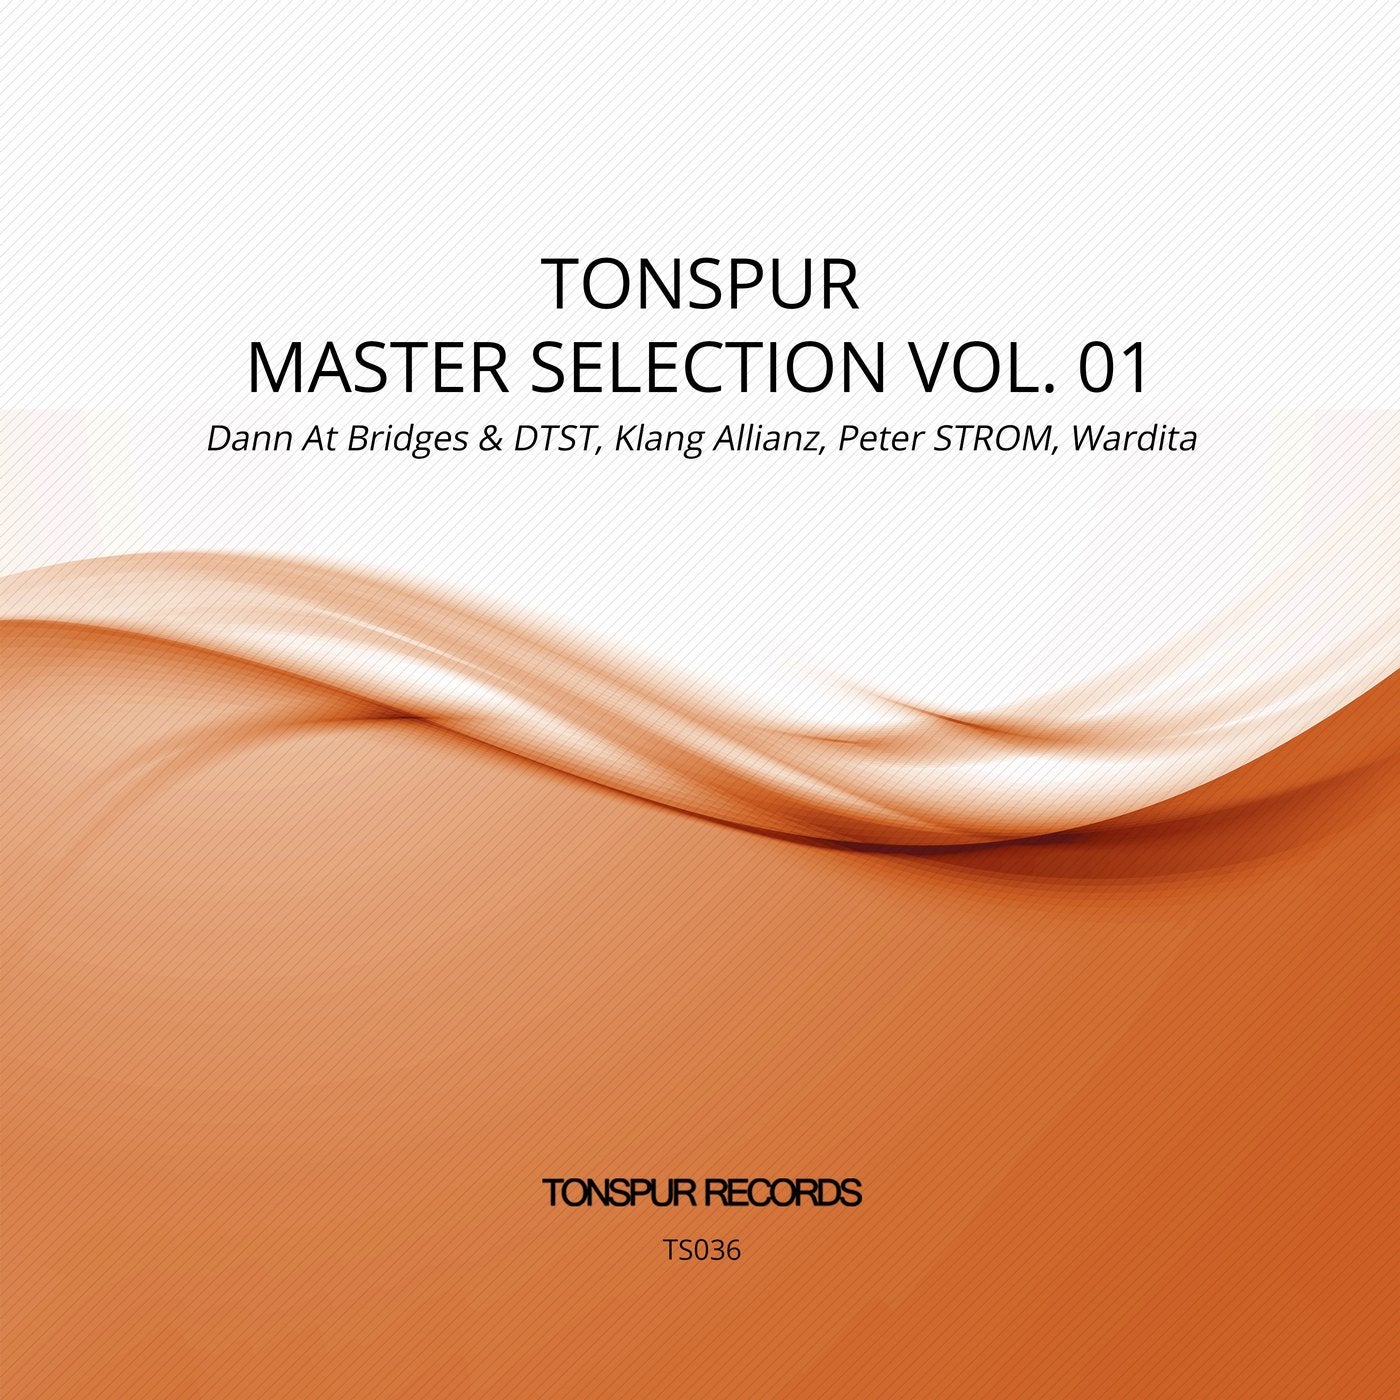 Tonspur Master Selection, Vol. 01